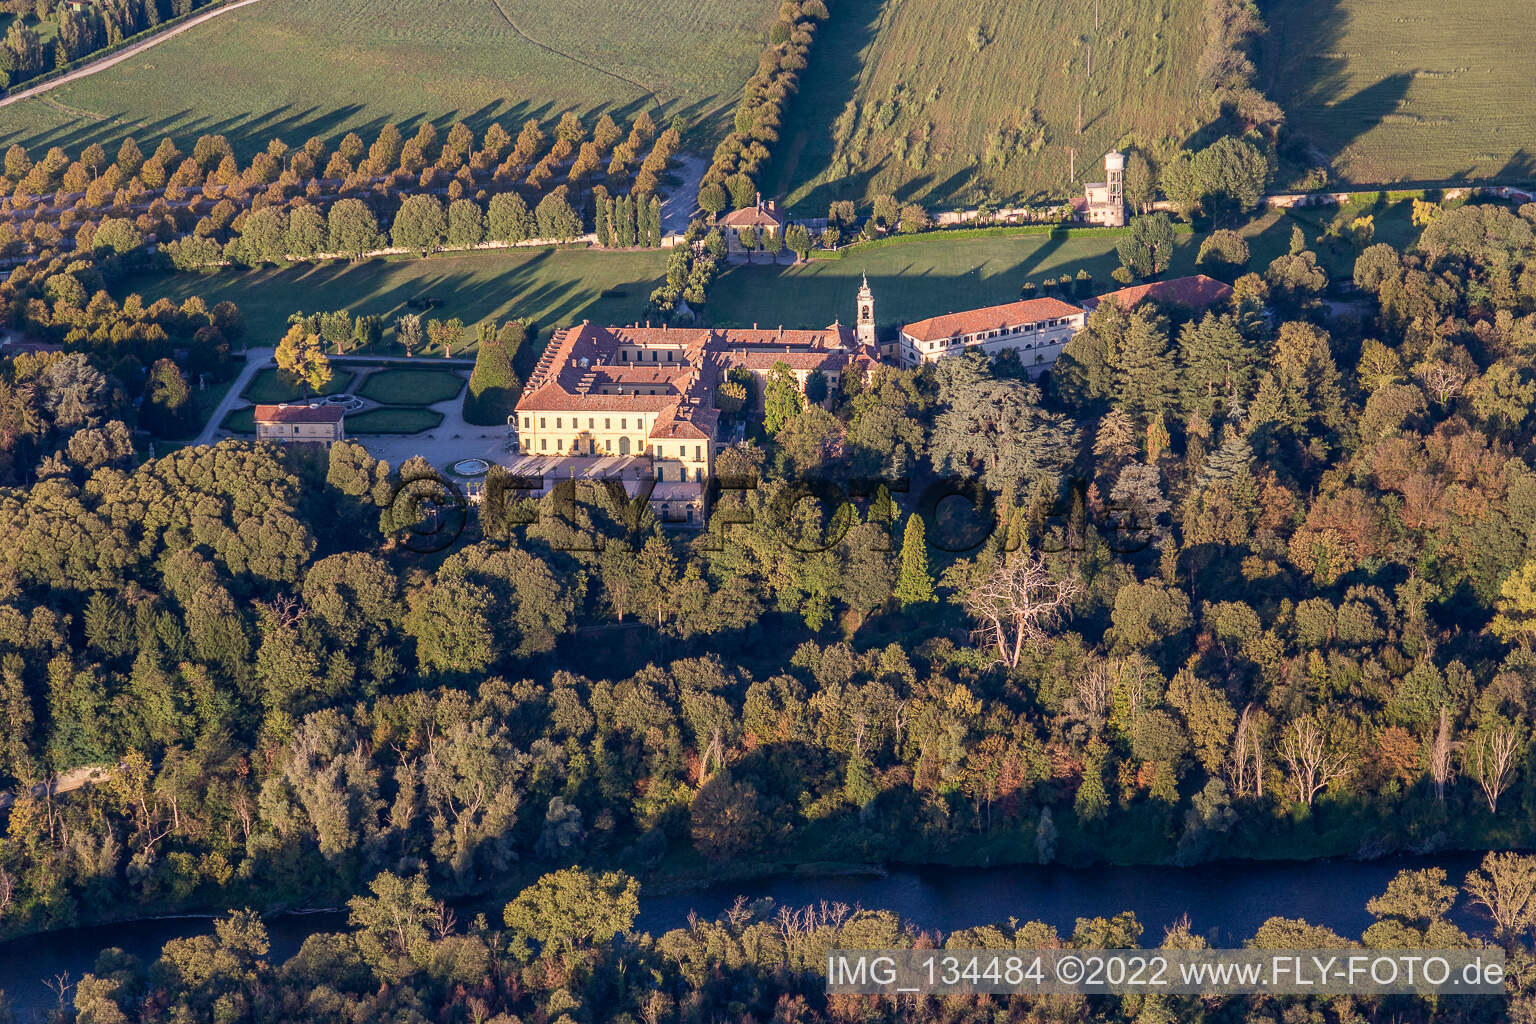 Villa Castelbarco in Vaprio d’Adda in the state Lombardy, Italy